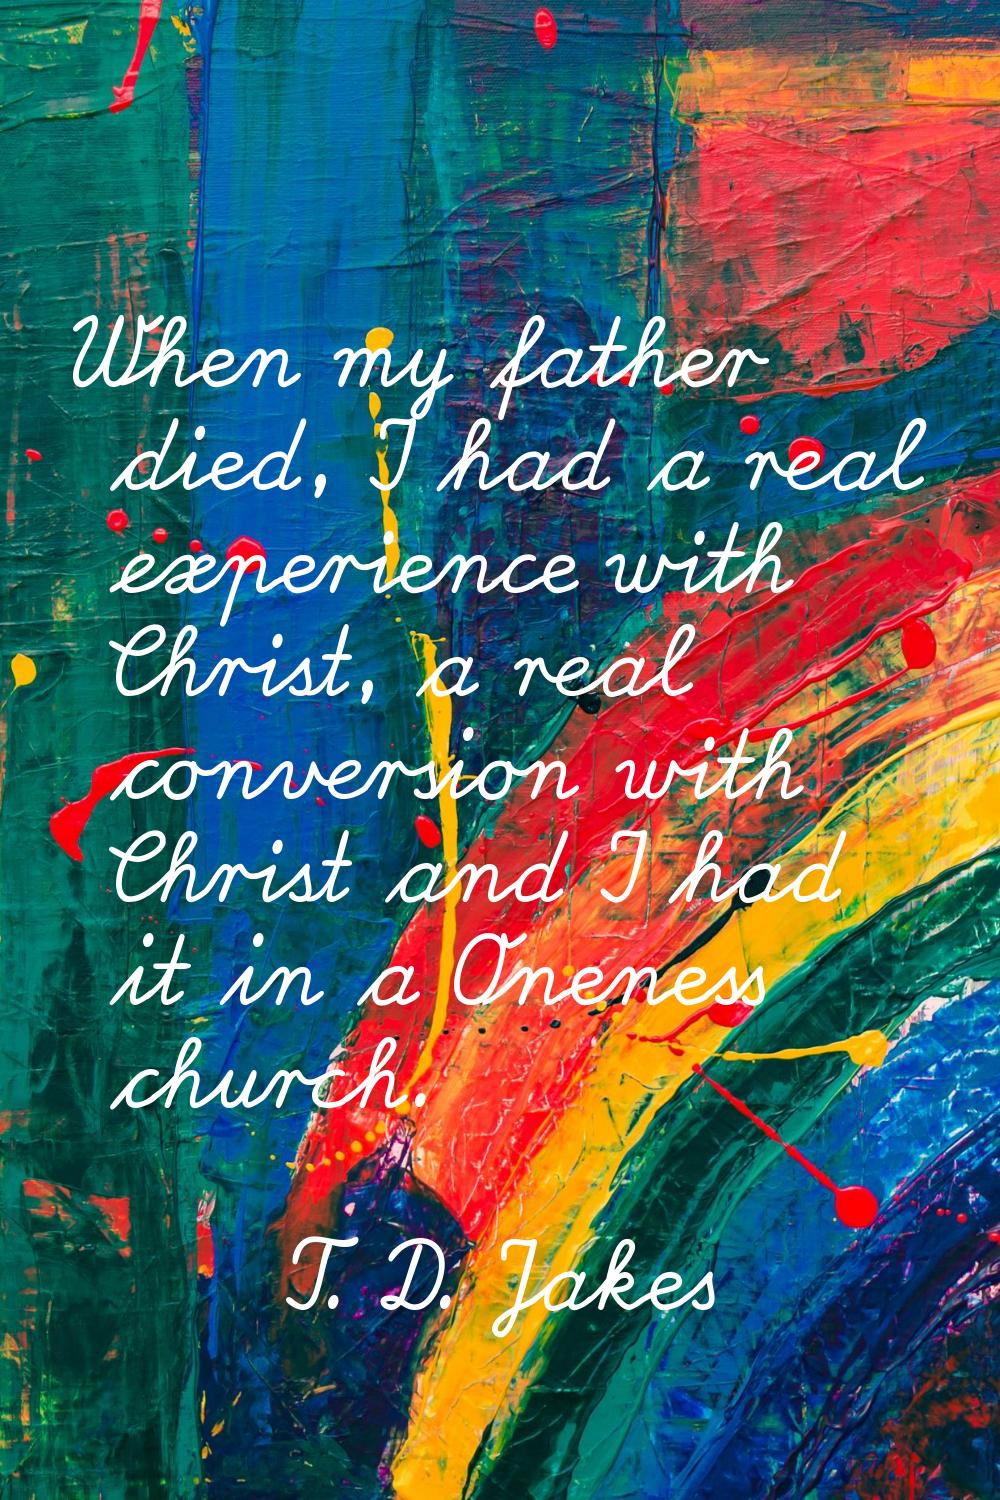 When my father died, I had a real experience with Christ, a real conversion with Christ and I had i